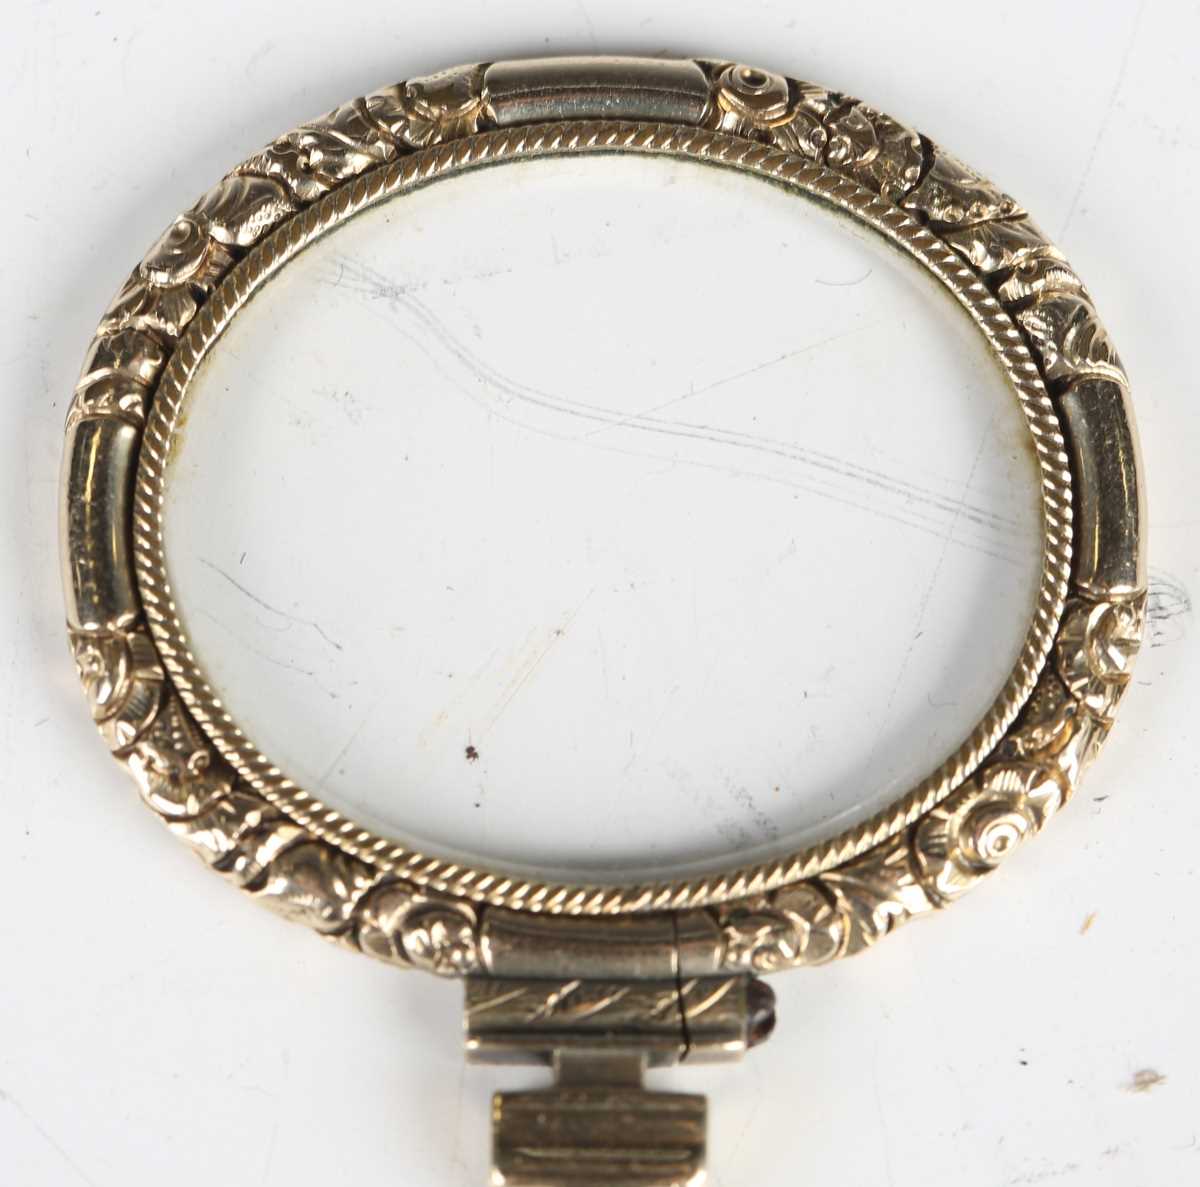 A mid-19th century gold framed magnifying lens, finely chased with foliage, length 8cm. - Image 9 of 12